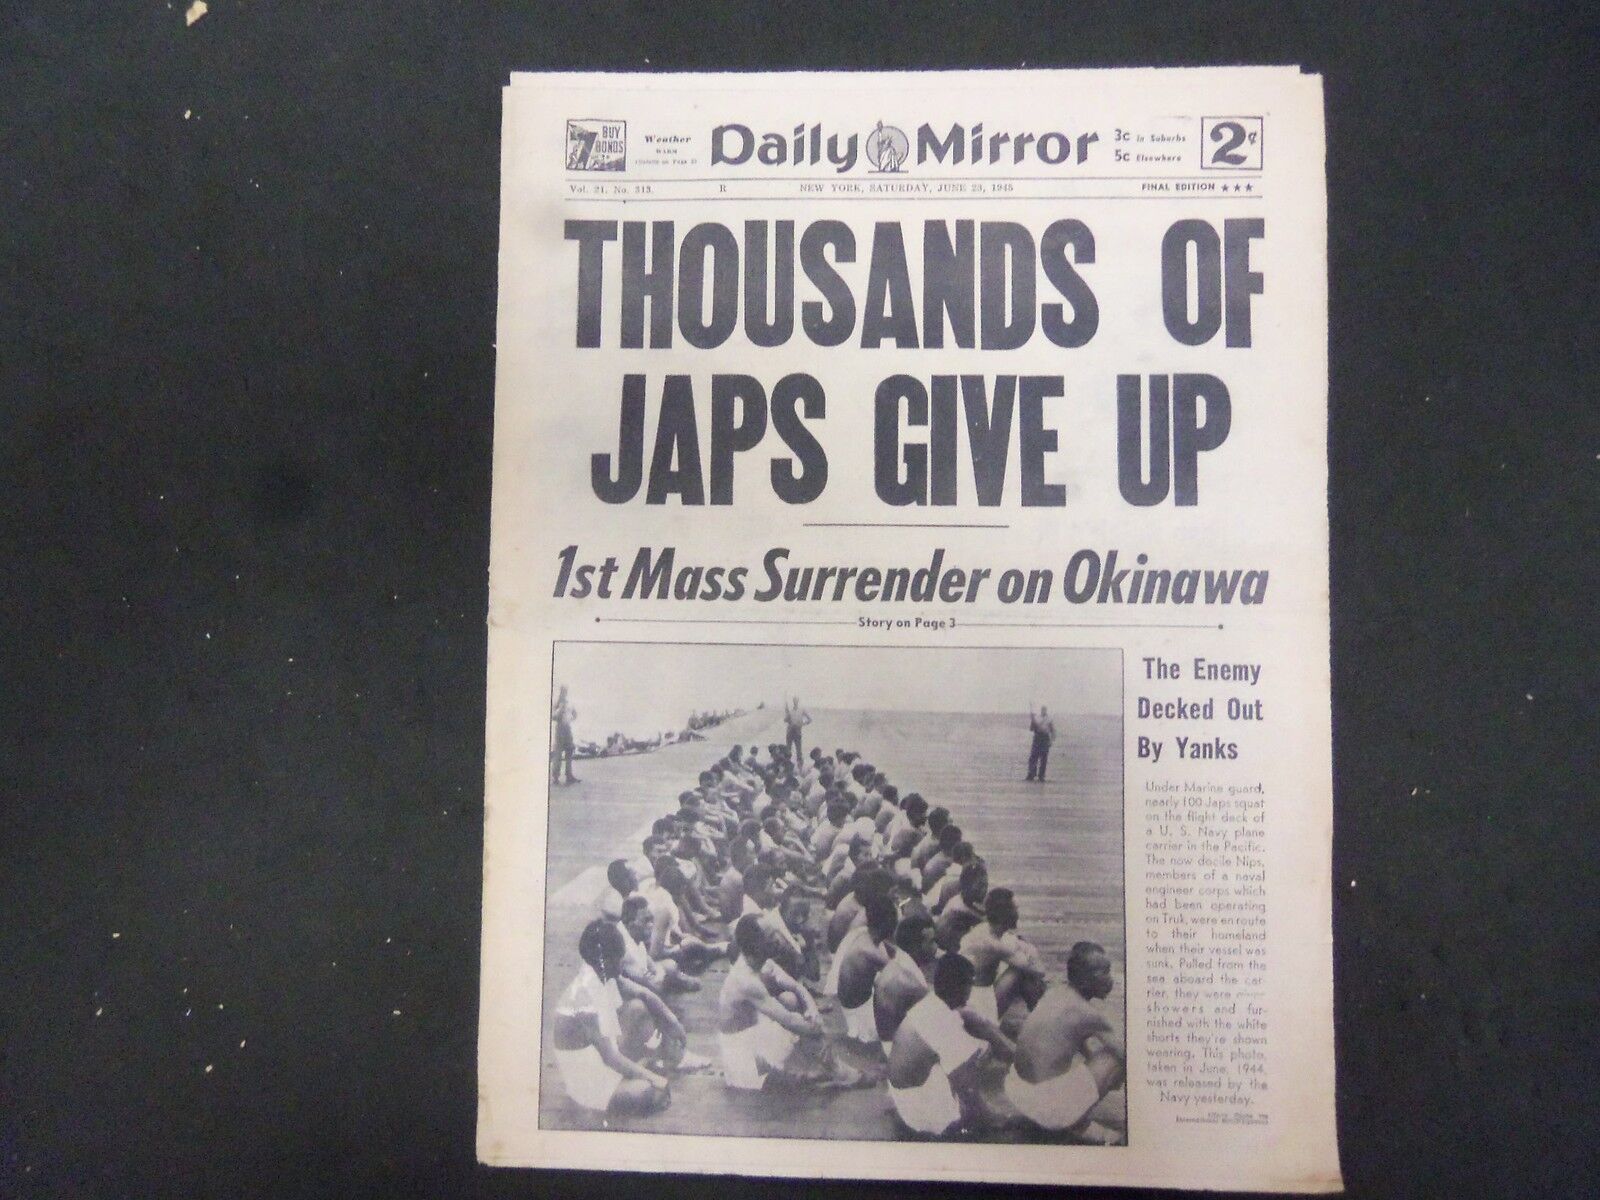 1945 JUNE 23 NEW YORK DAILY MIRROR - THOUSNADS OF JAPS GIVE UP - NP 2242